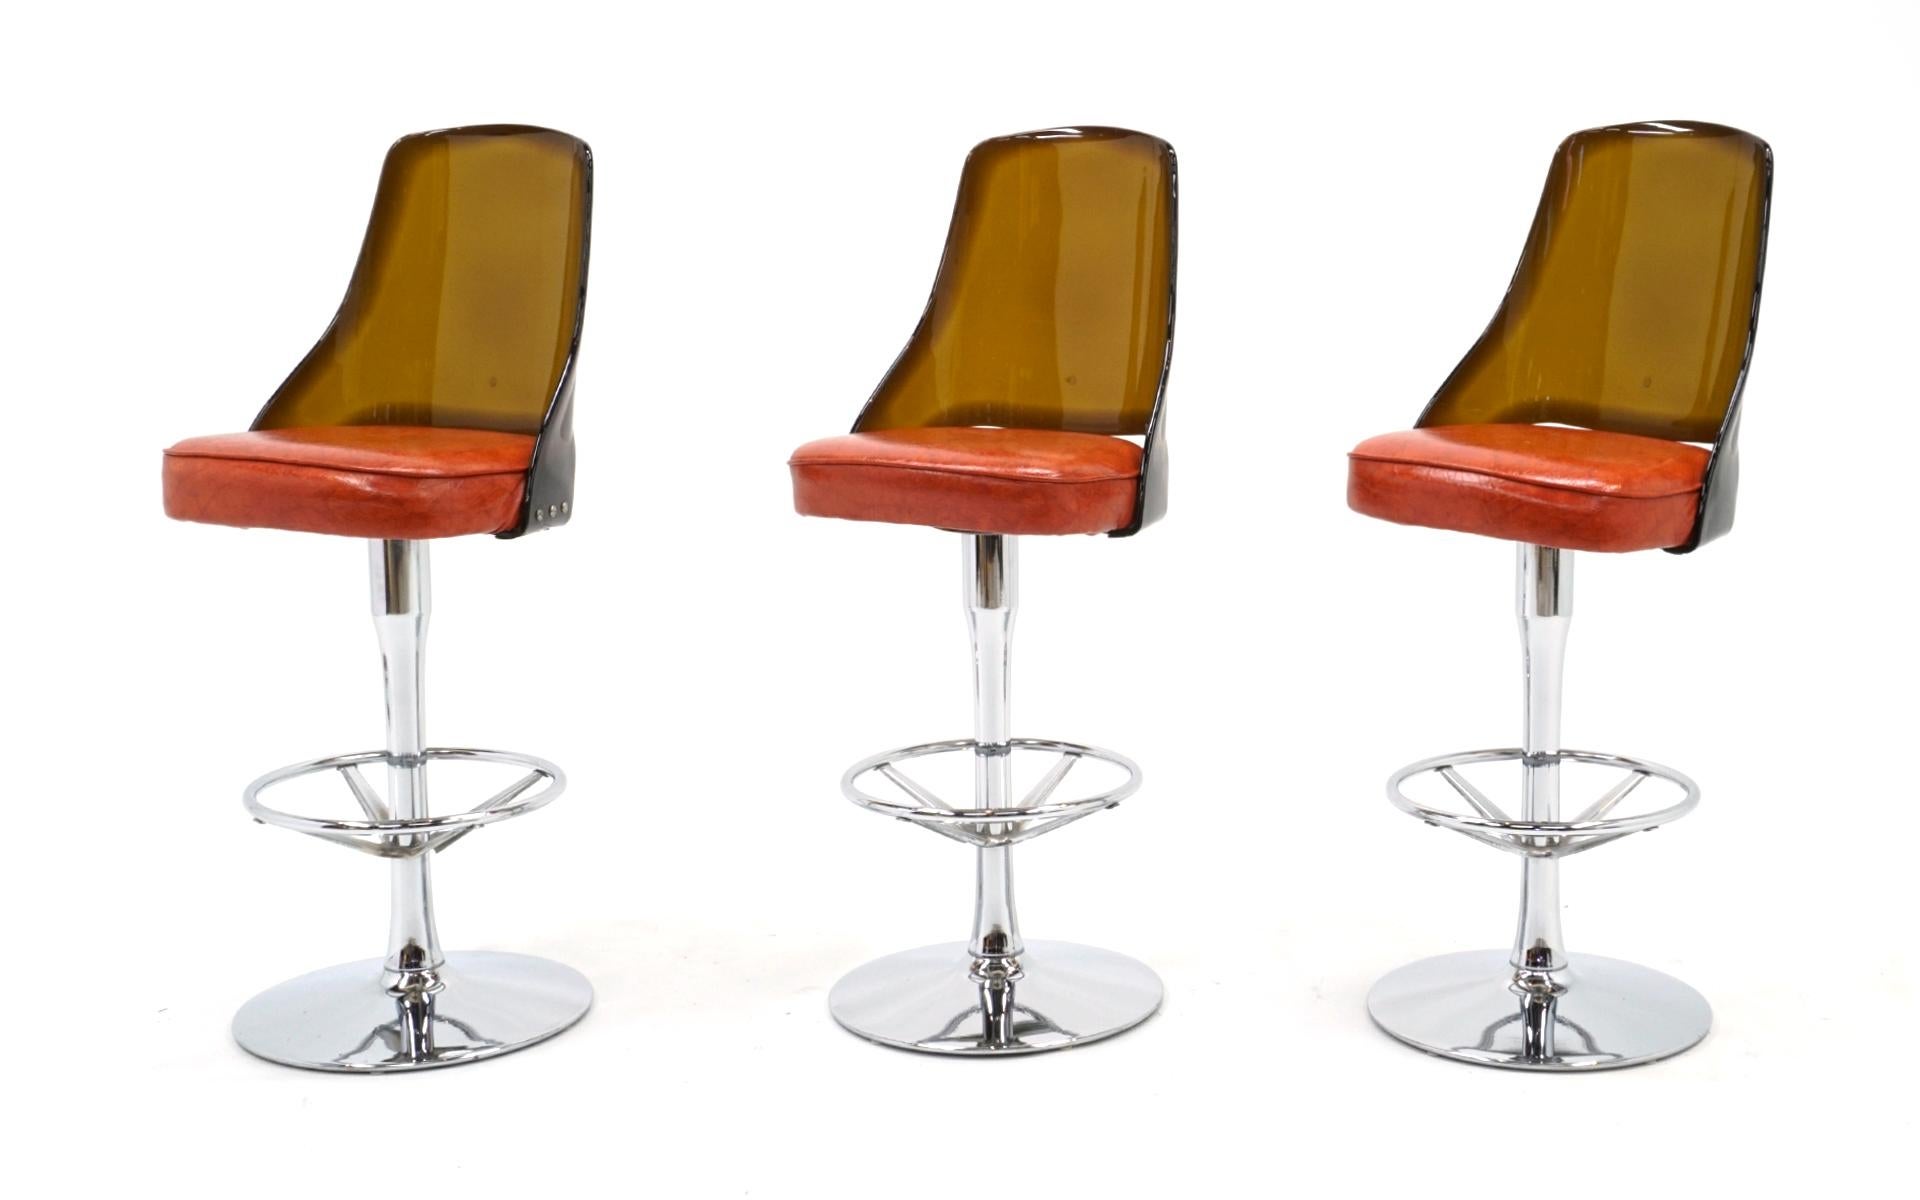 Four have sold, we have a pair available.  Acrylic and chrome barstool with orange seats in very good to excellent condition. Thick 3/8th inch amber colored Lucite backs and chrome stand with footrest. The orange vinyl seats look virtually like new.